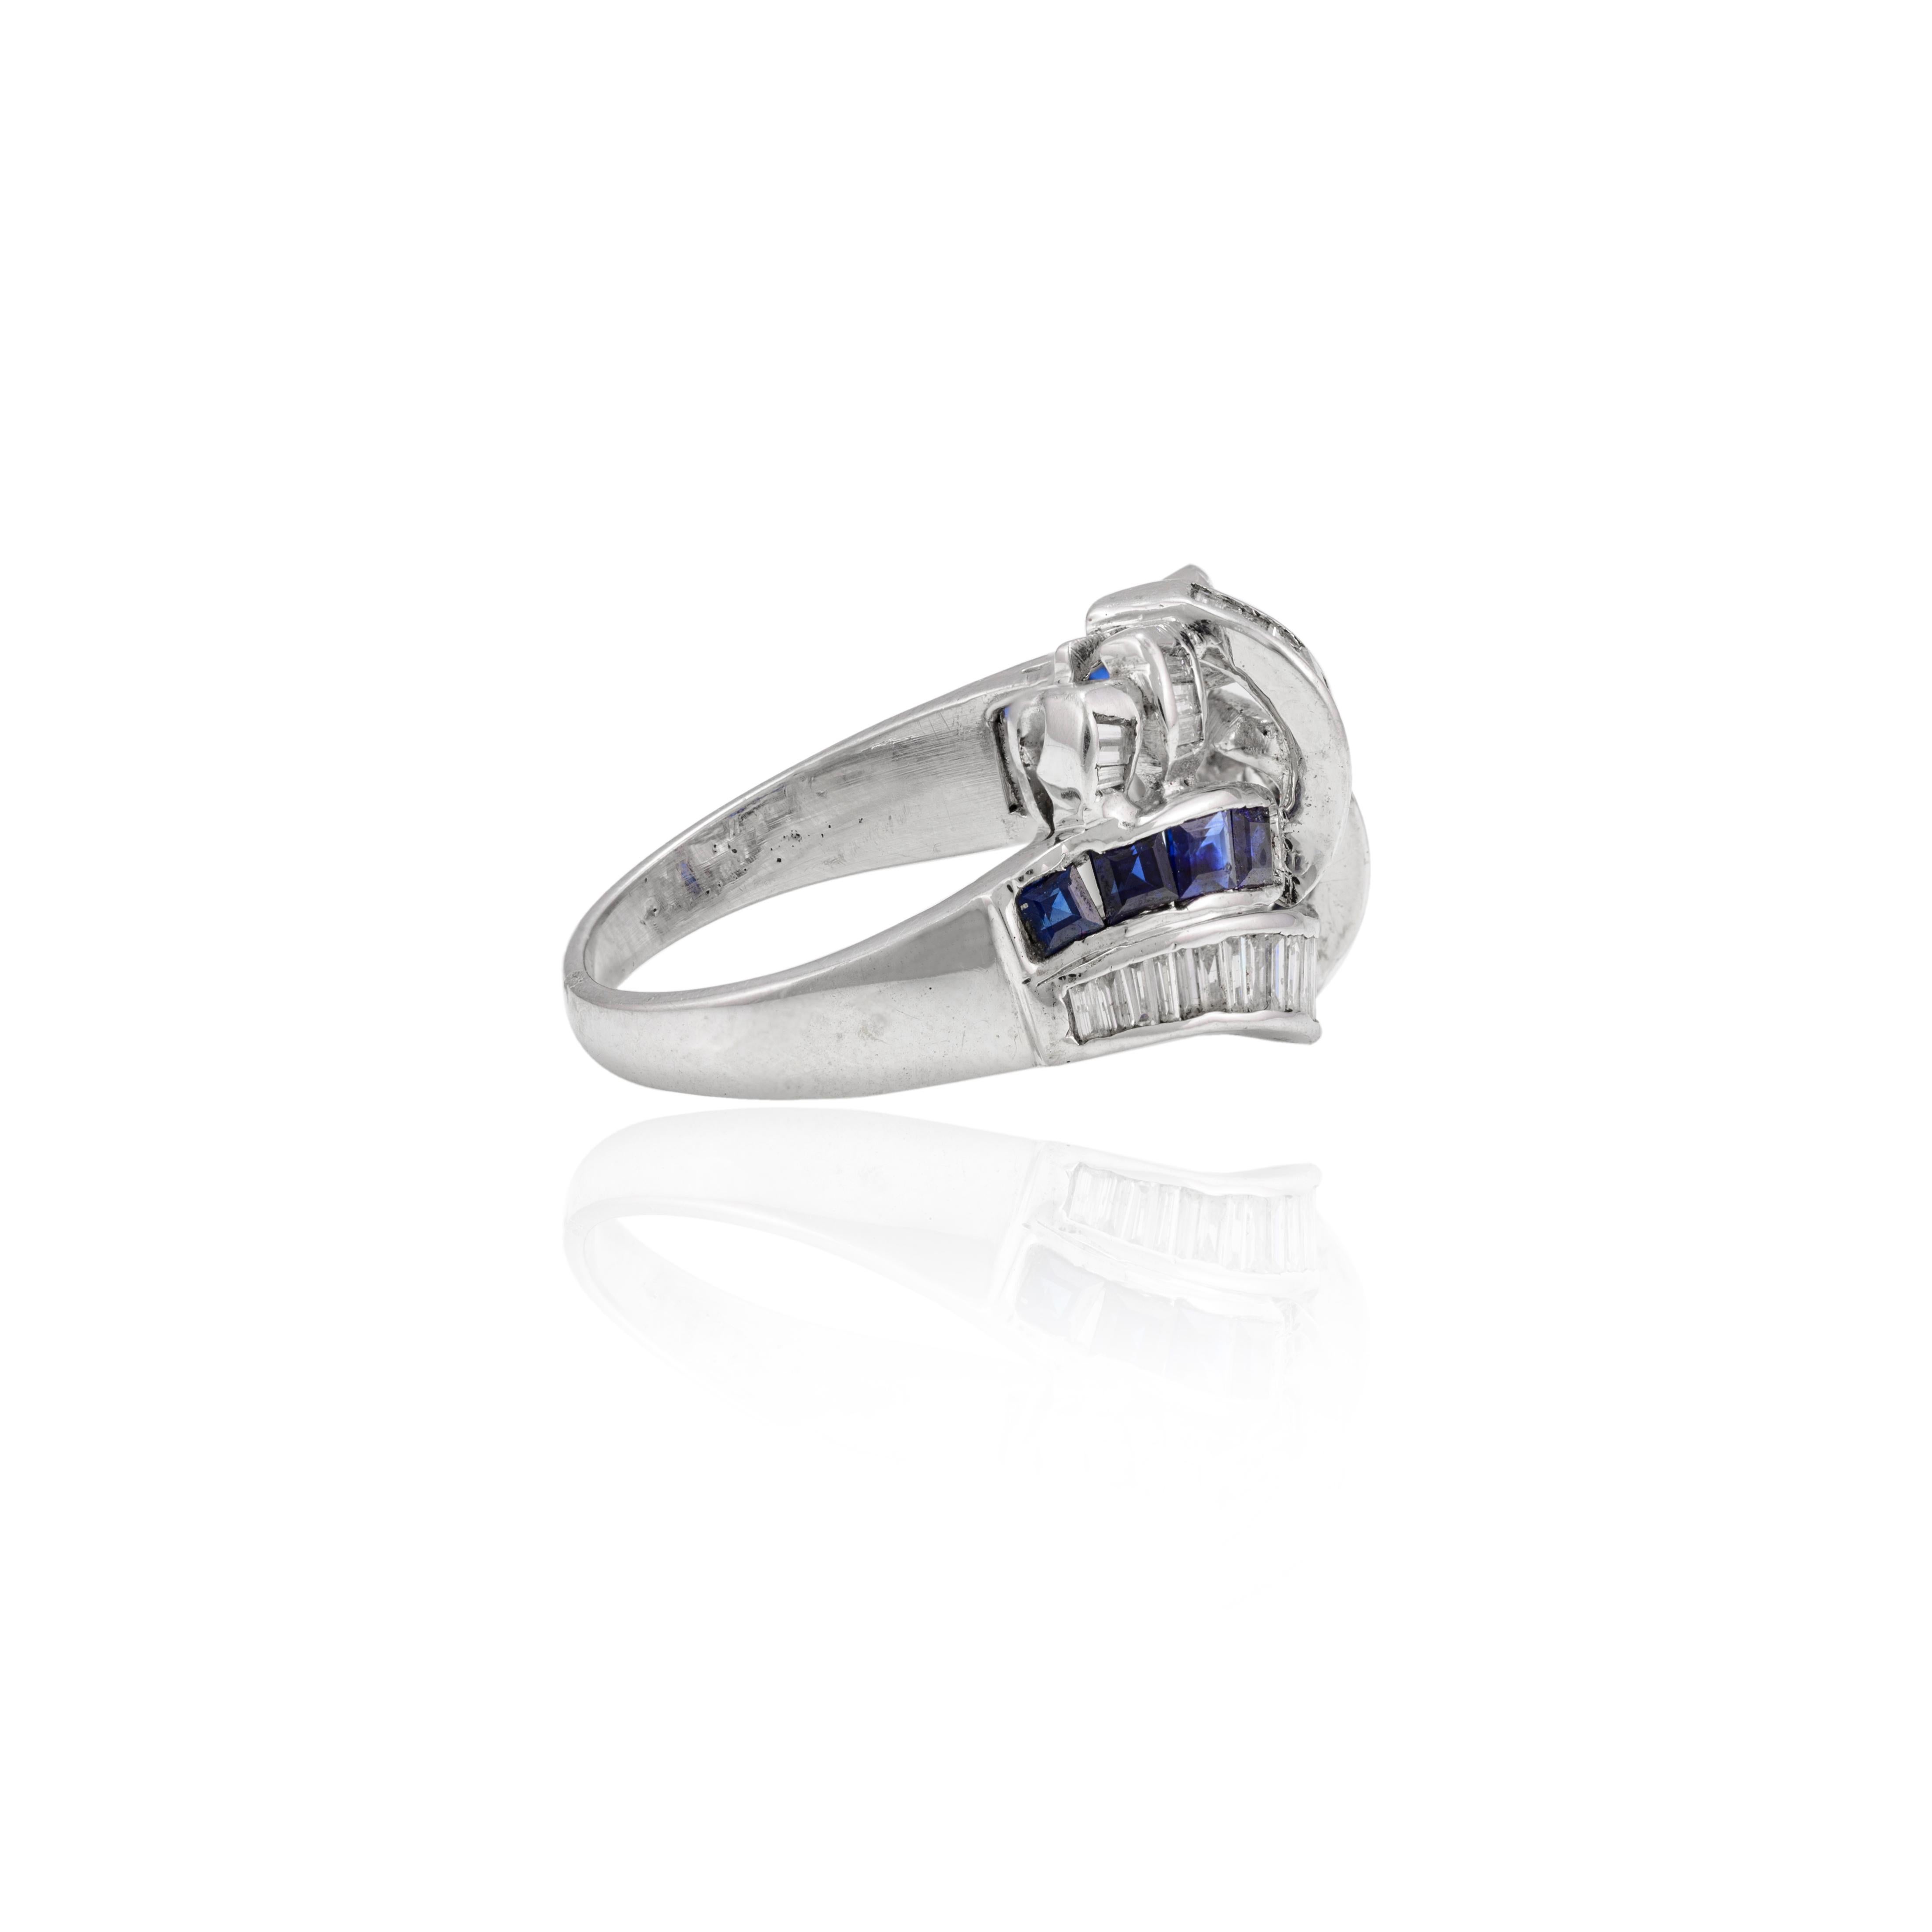 For Sale:  Art Deco 1.3 Carat Blue Sapphire and Diamond Ring in 18k Solid White Gold 7